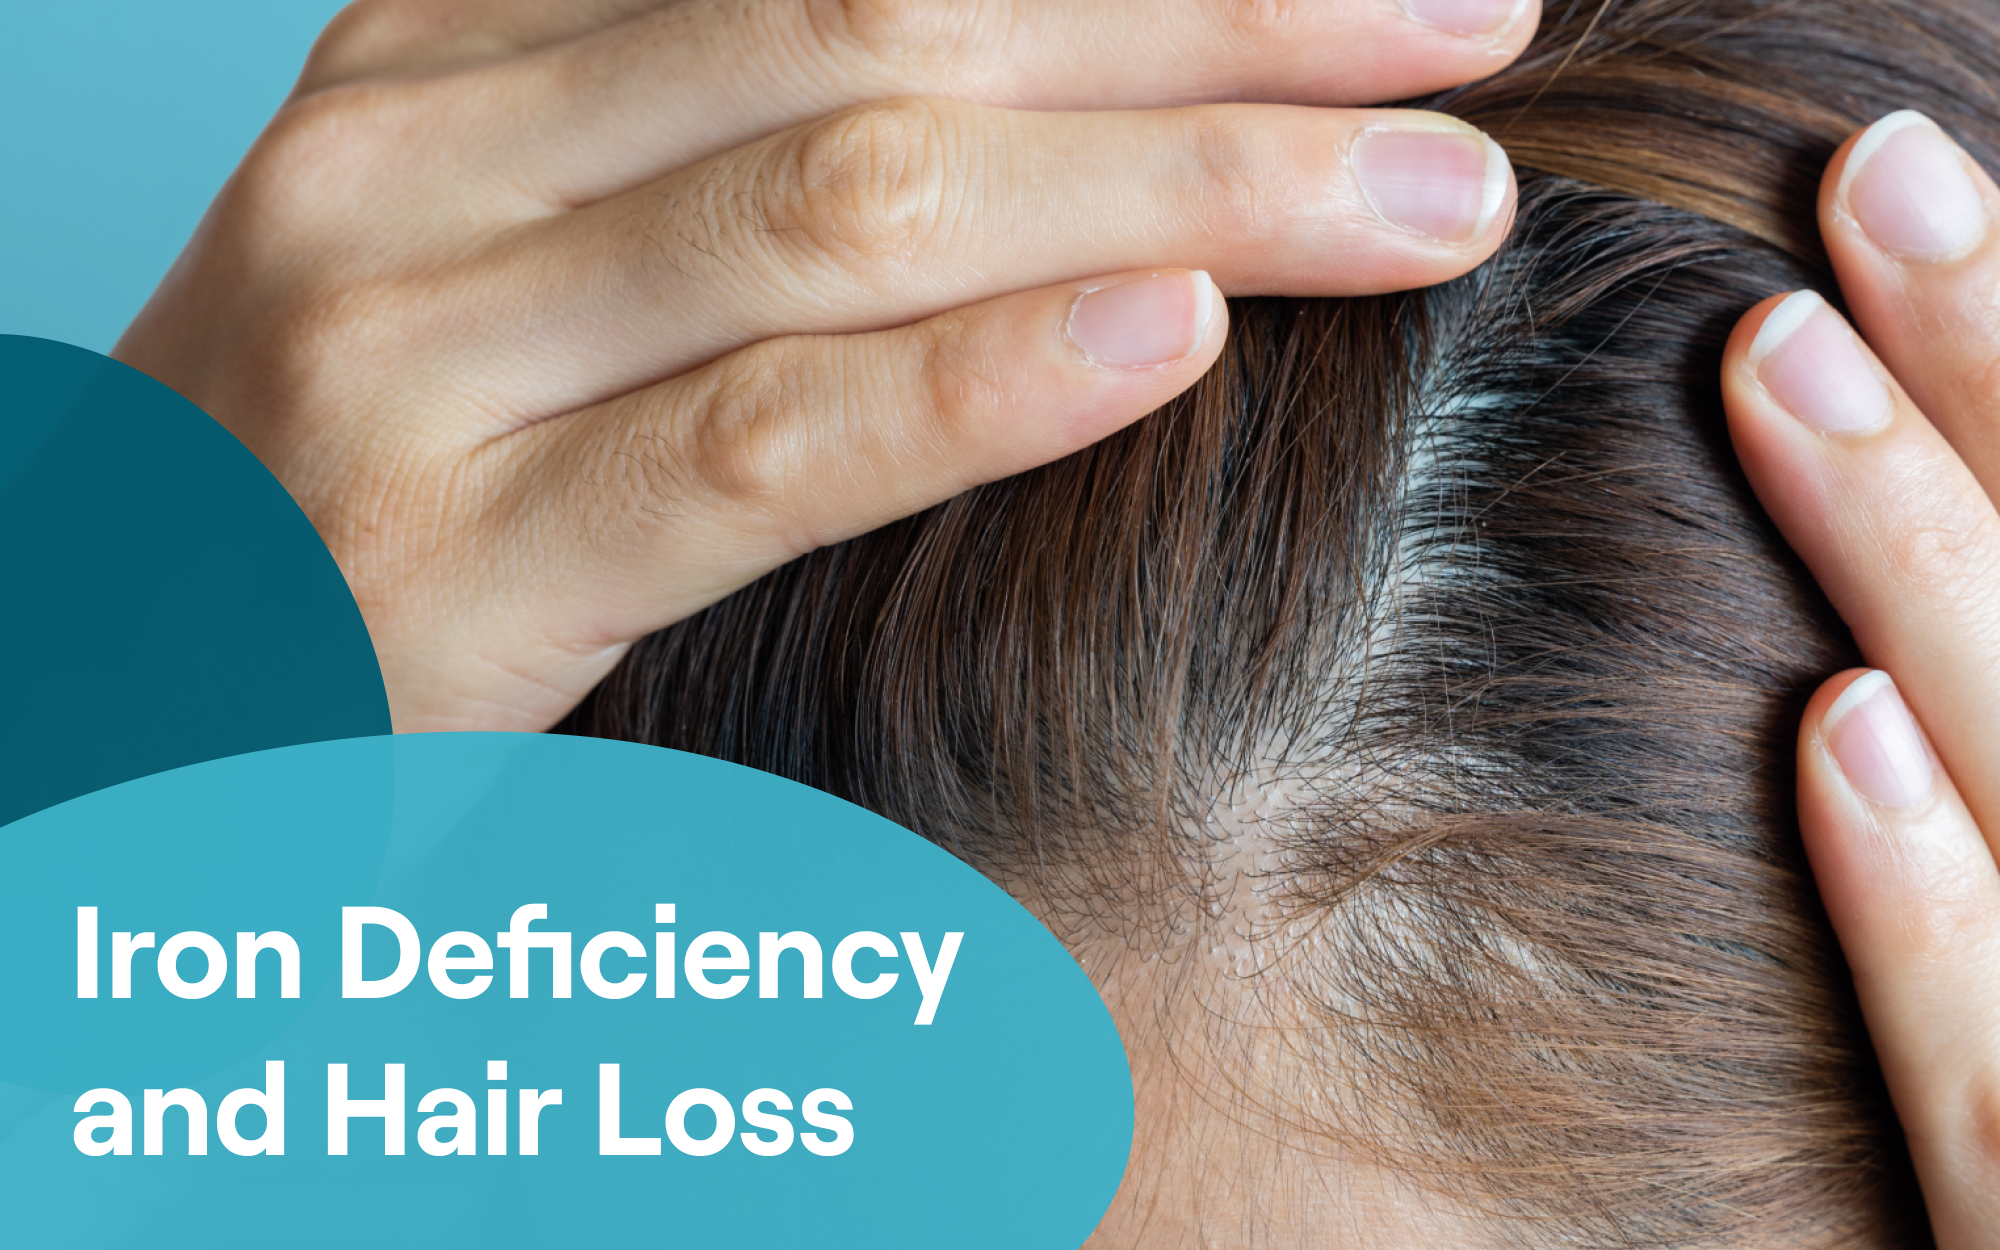 Vitamin D Deficiency and Hair Loss: What's the Connection?